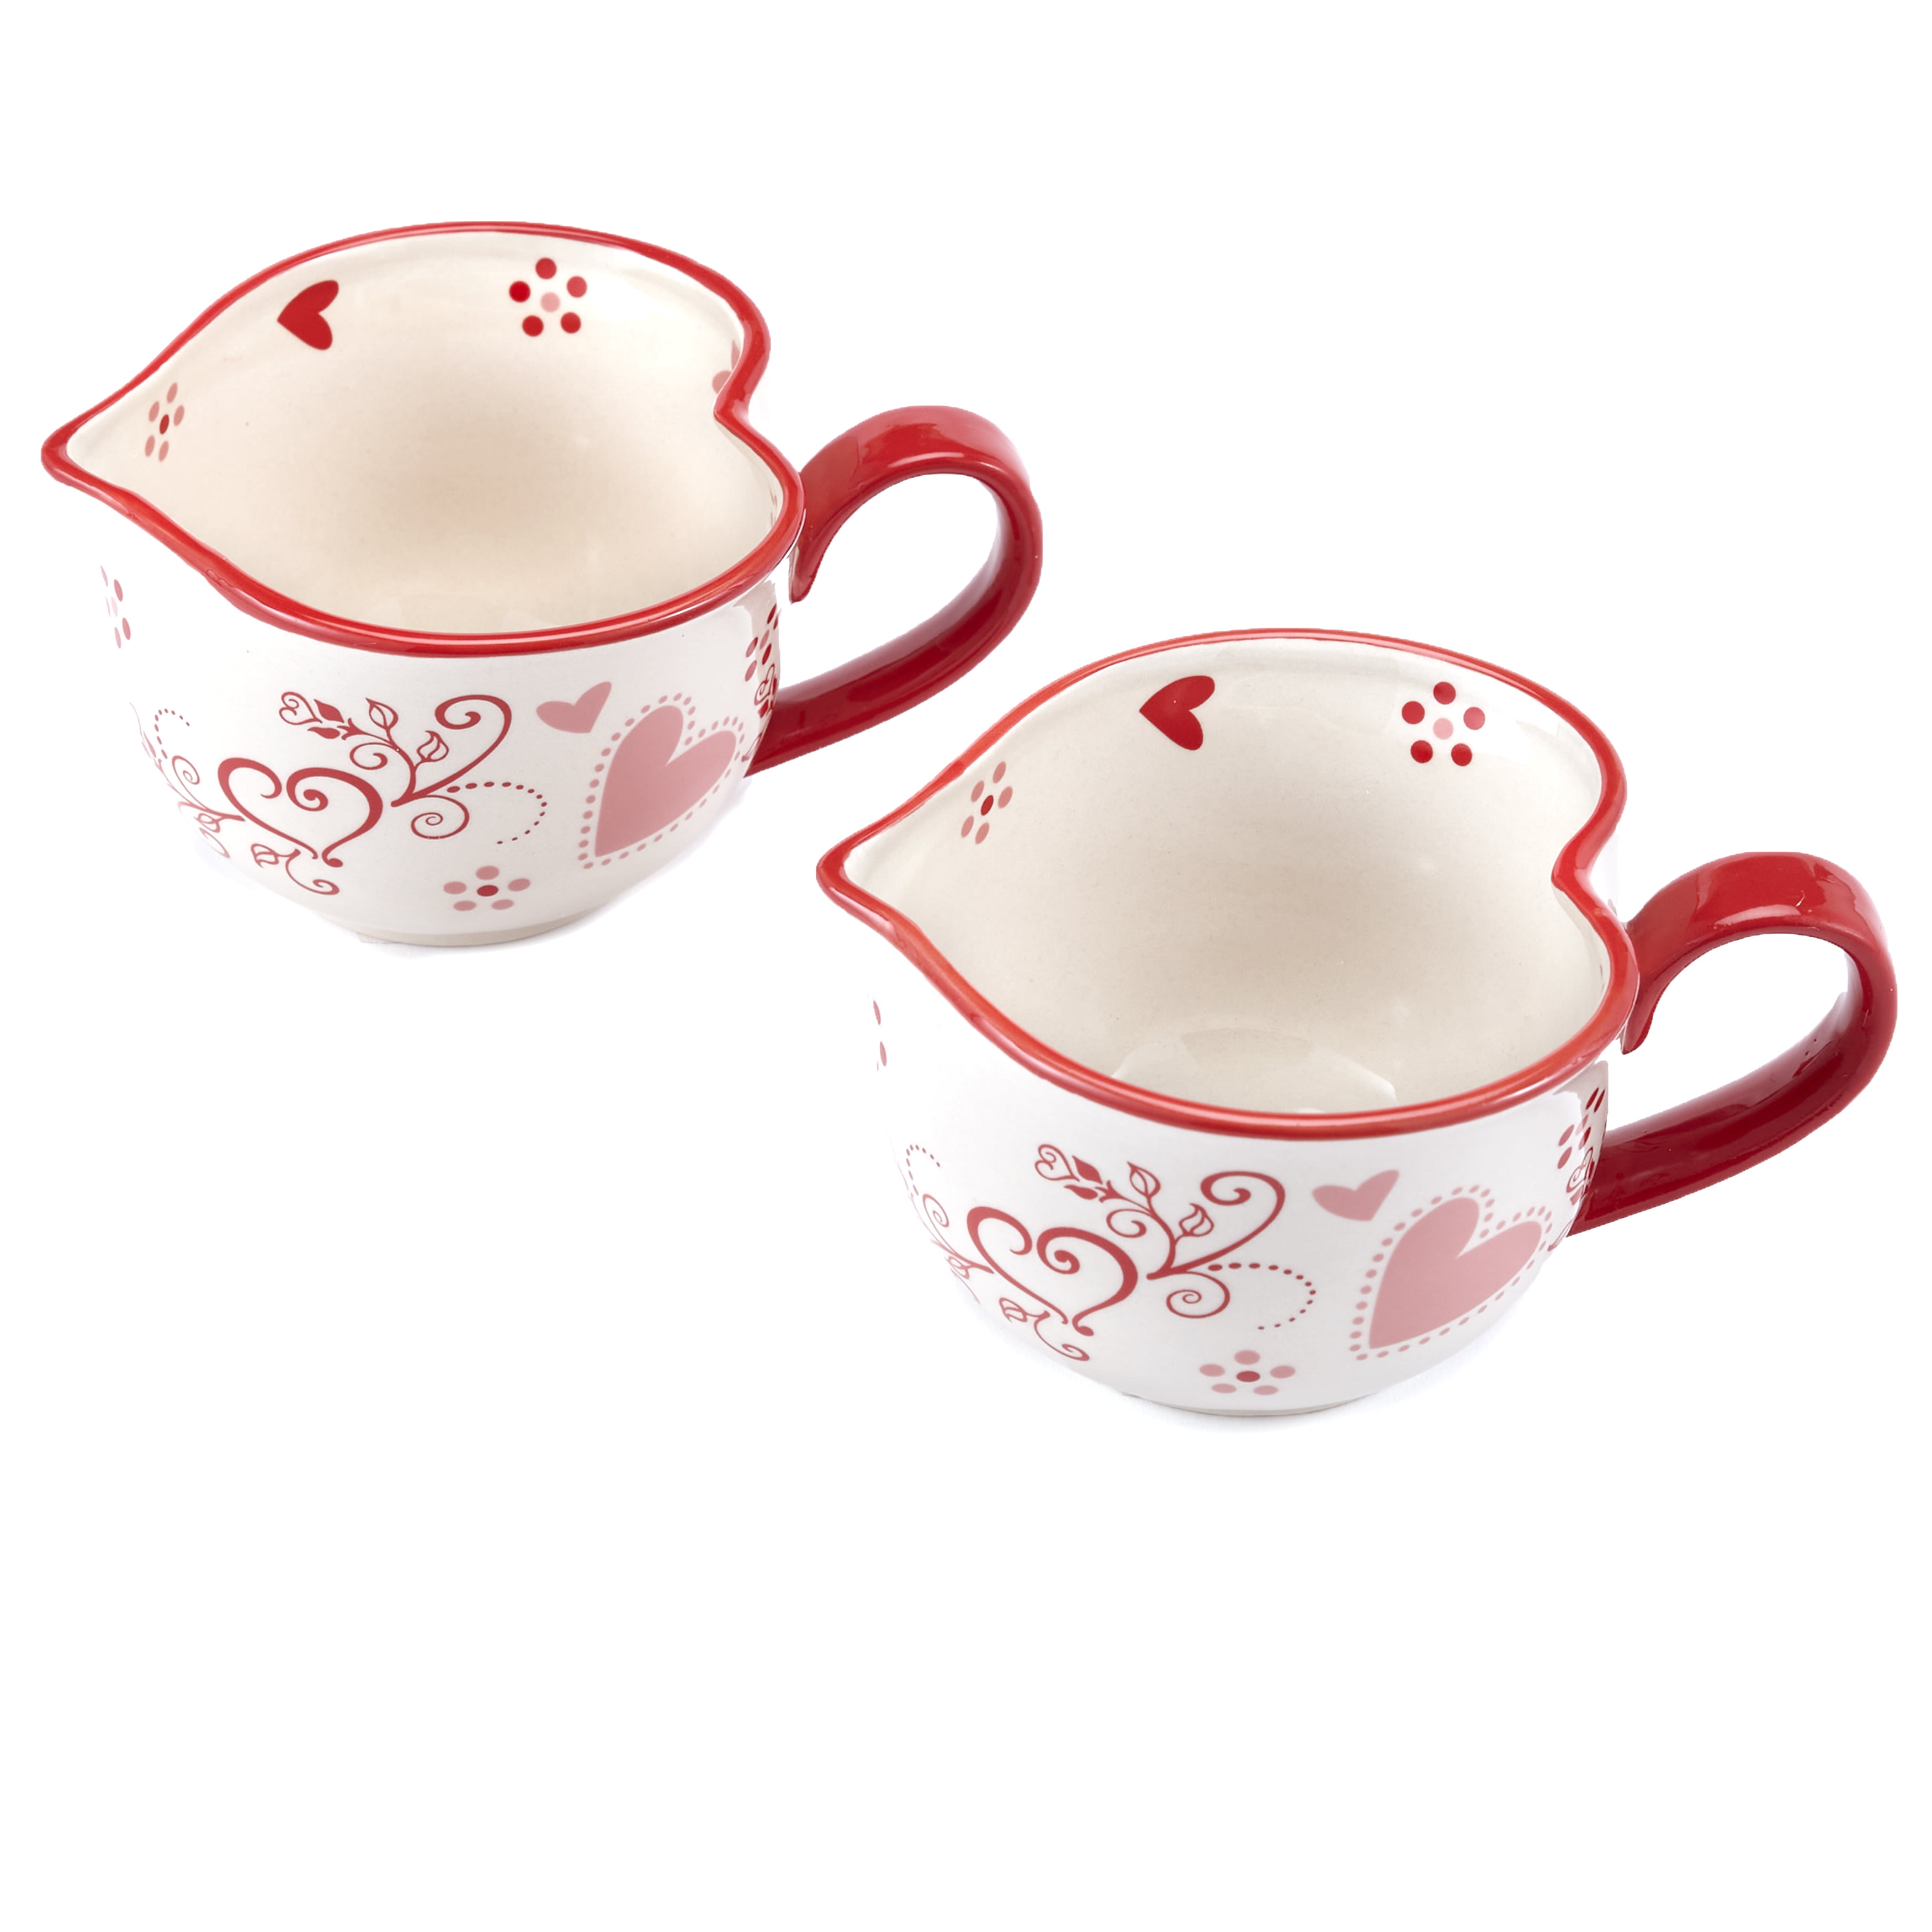 A Pair of brand New Heart Coffee Mugs 